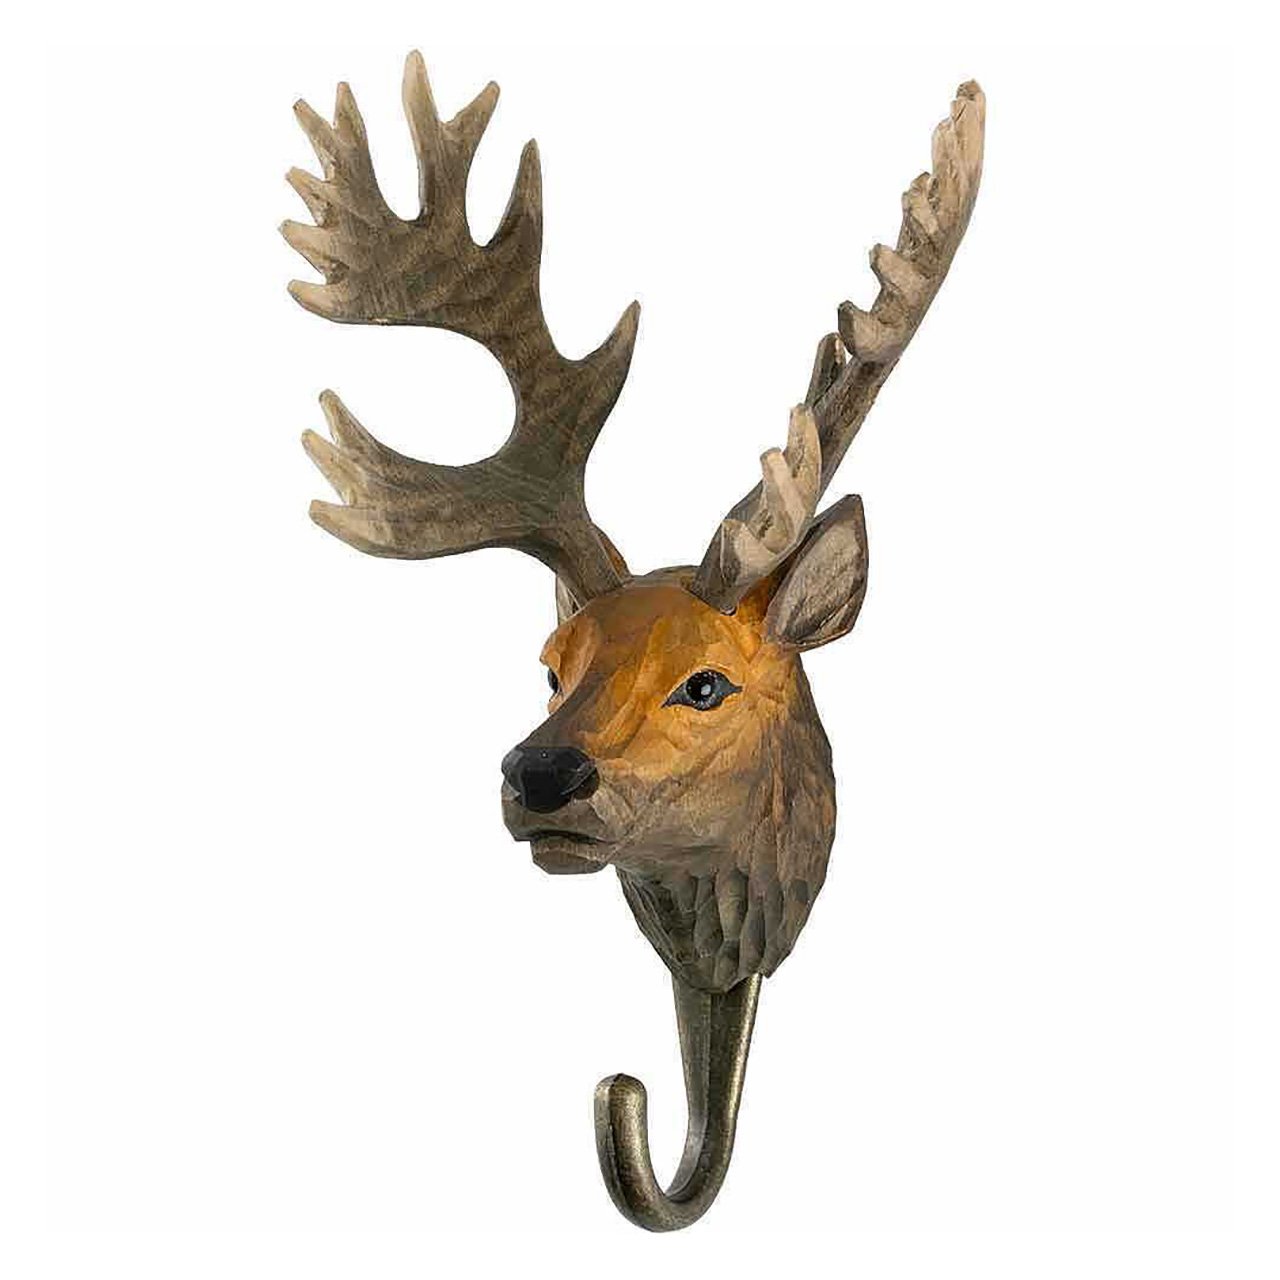 10 THE DESIGN GIFT SHOP Hand-Carved Red Deer Wall Hook by Wildlife Garden €31.91, 